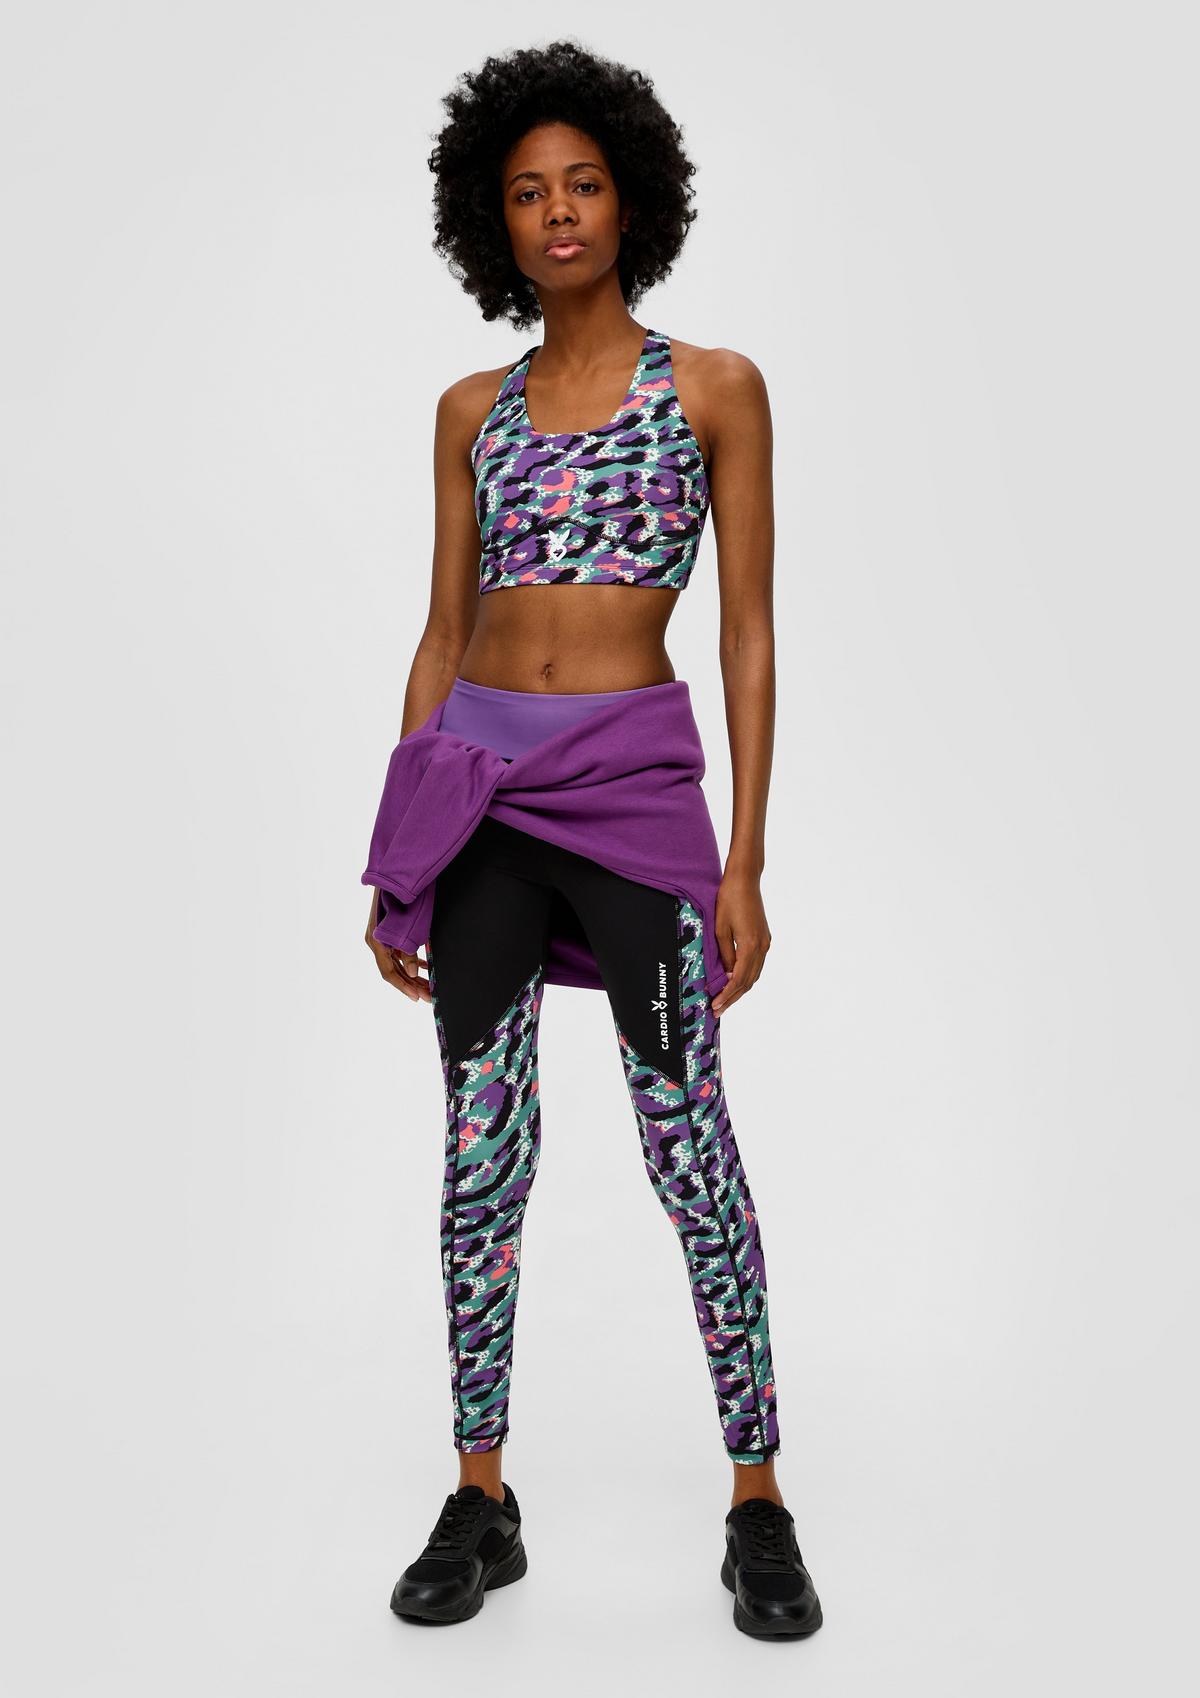 print Slim sporty leggings with fit: multicolor all-over an -